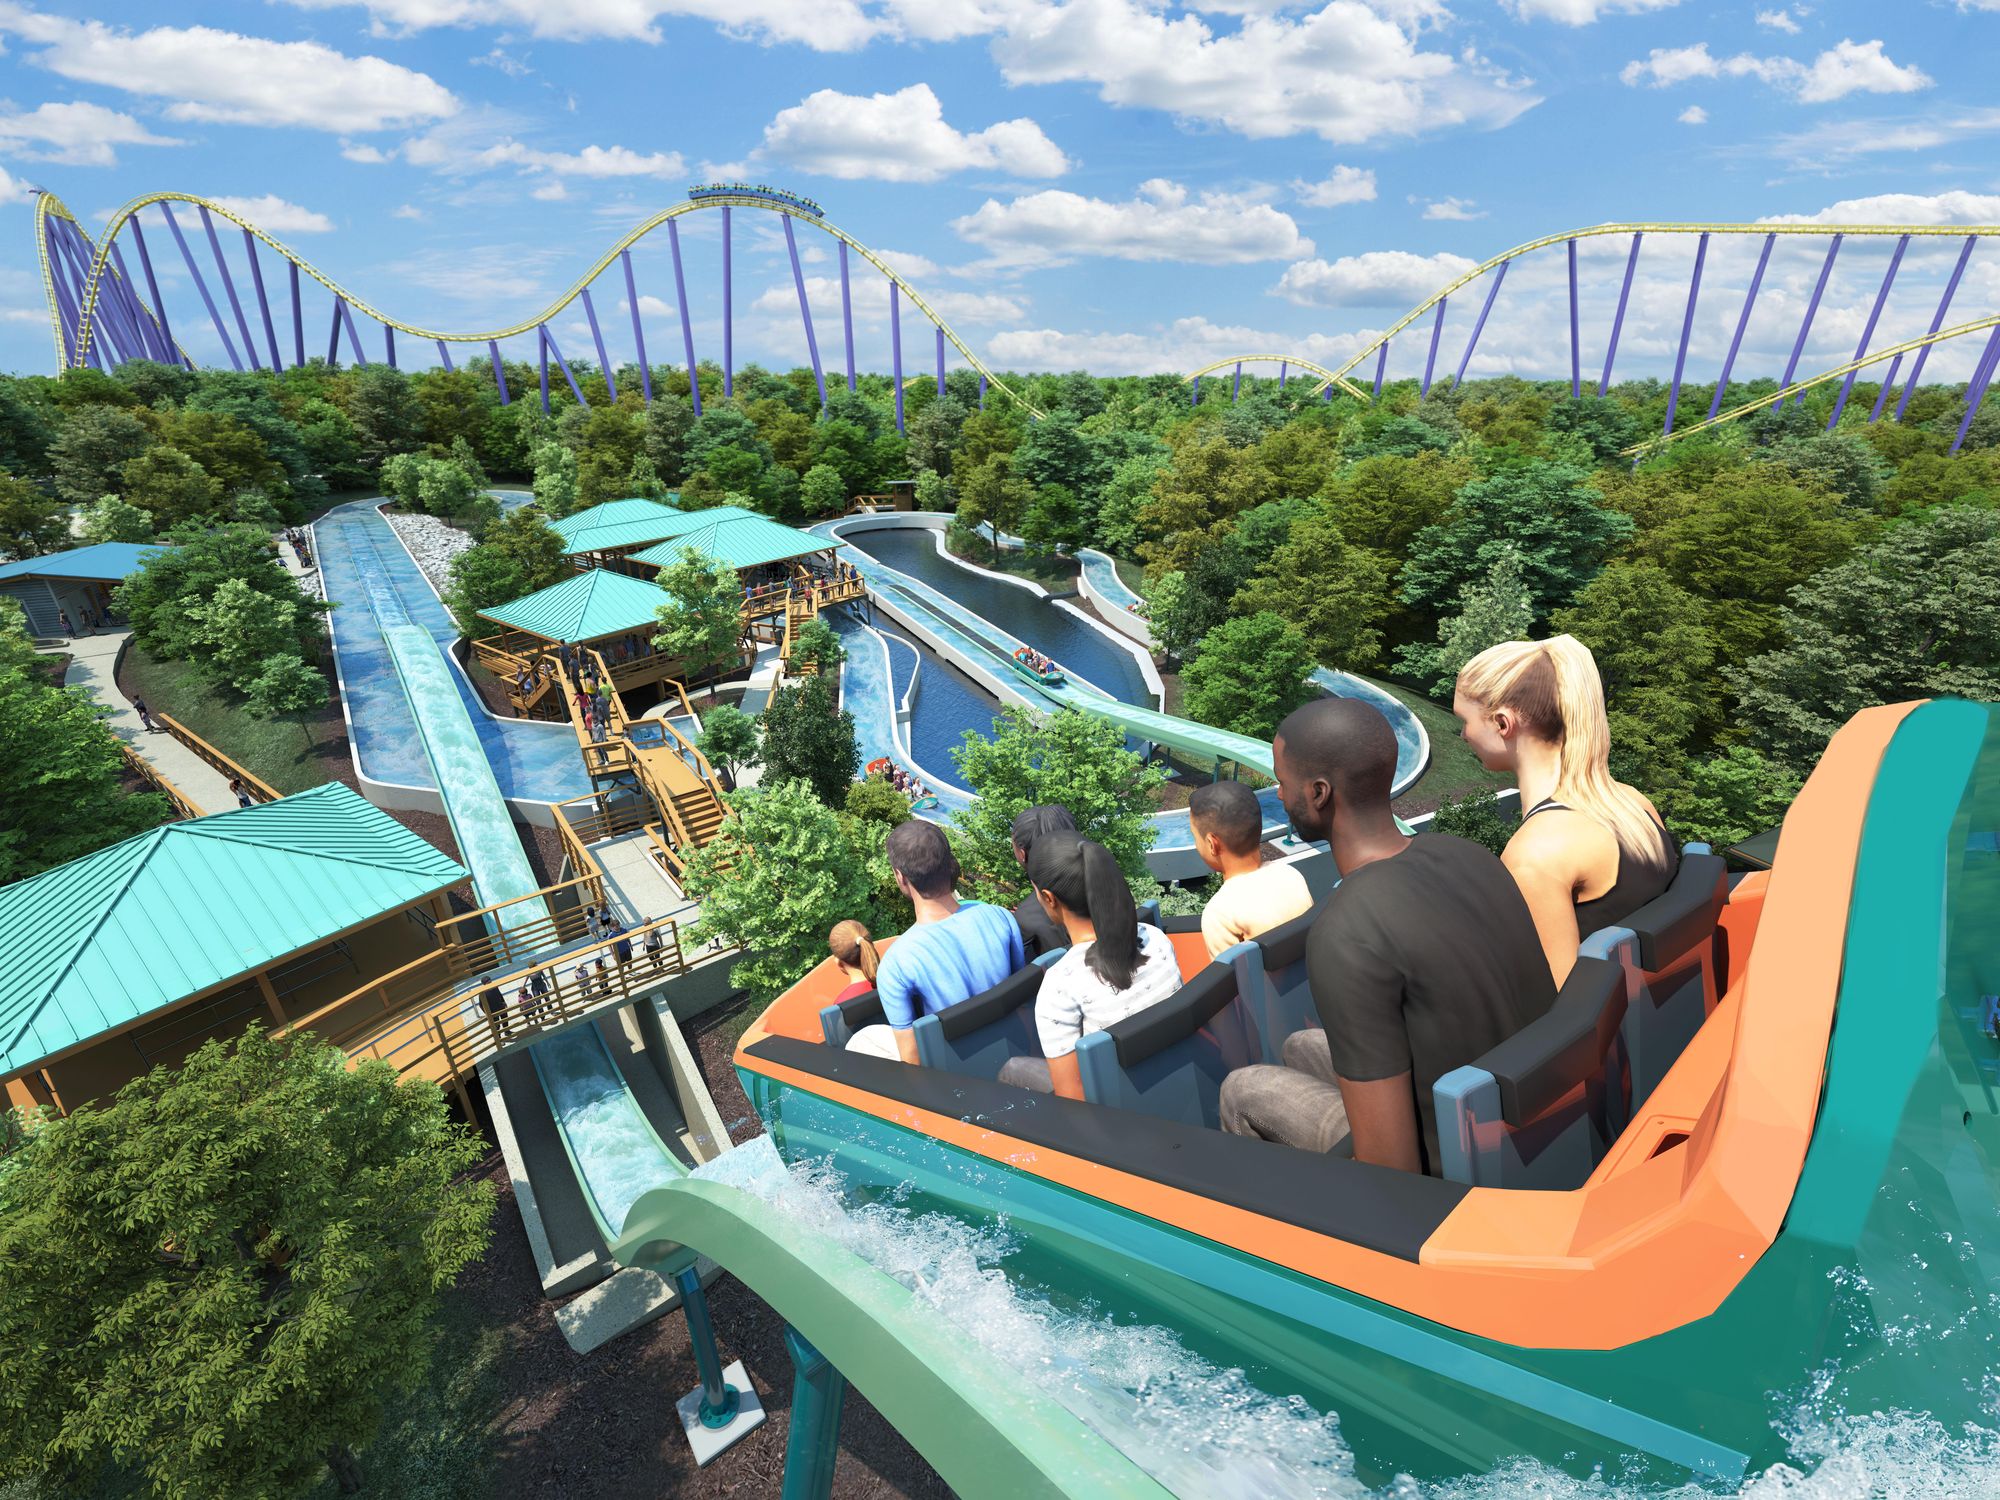 World's first water coaster of its kind catapults into Texas amusement